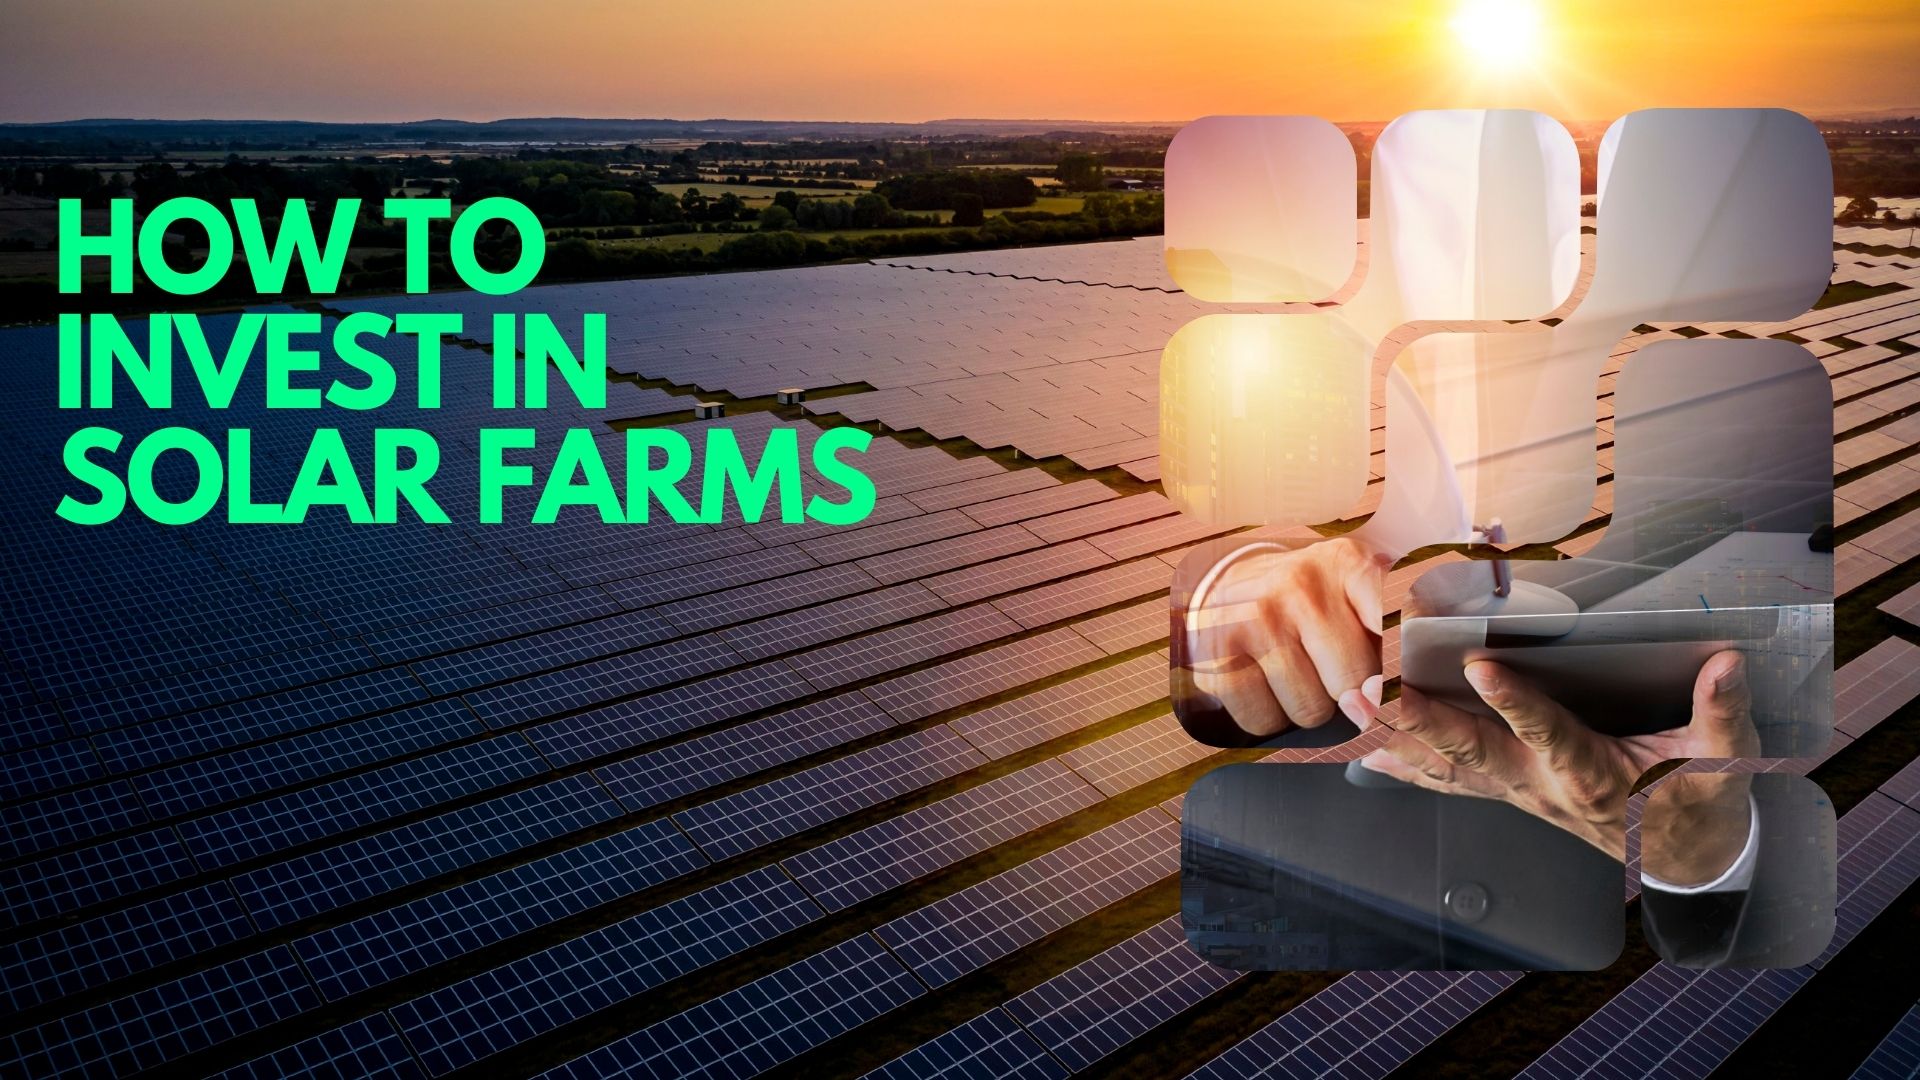 How to Invest in Solar Farms